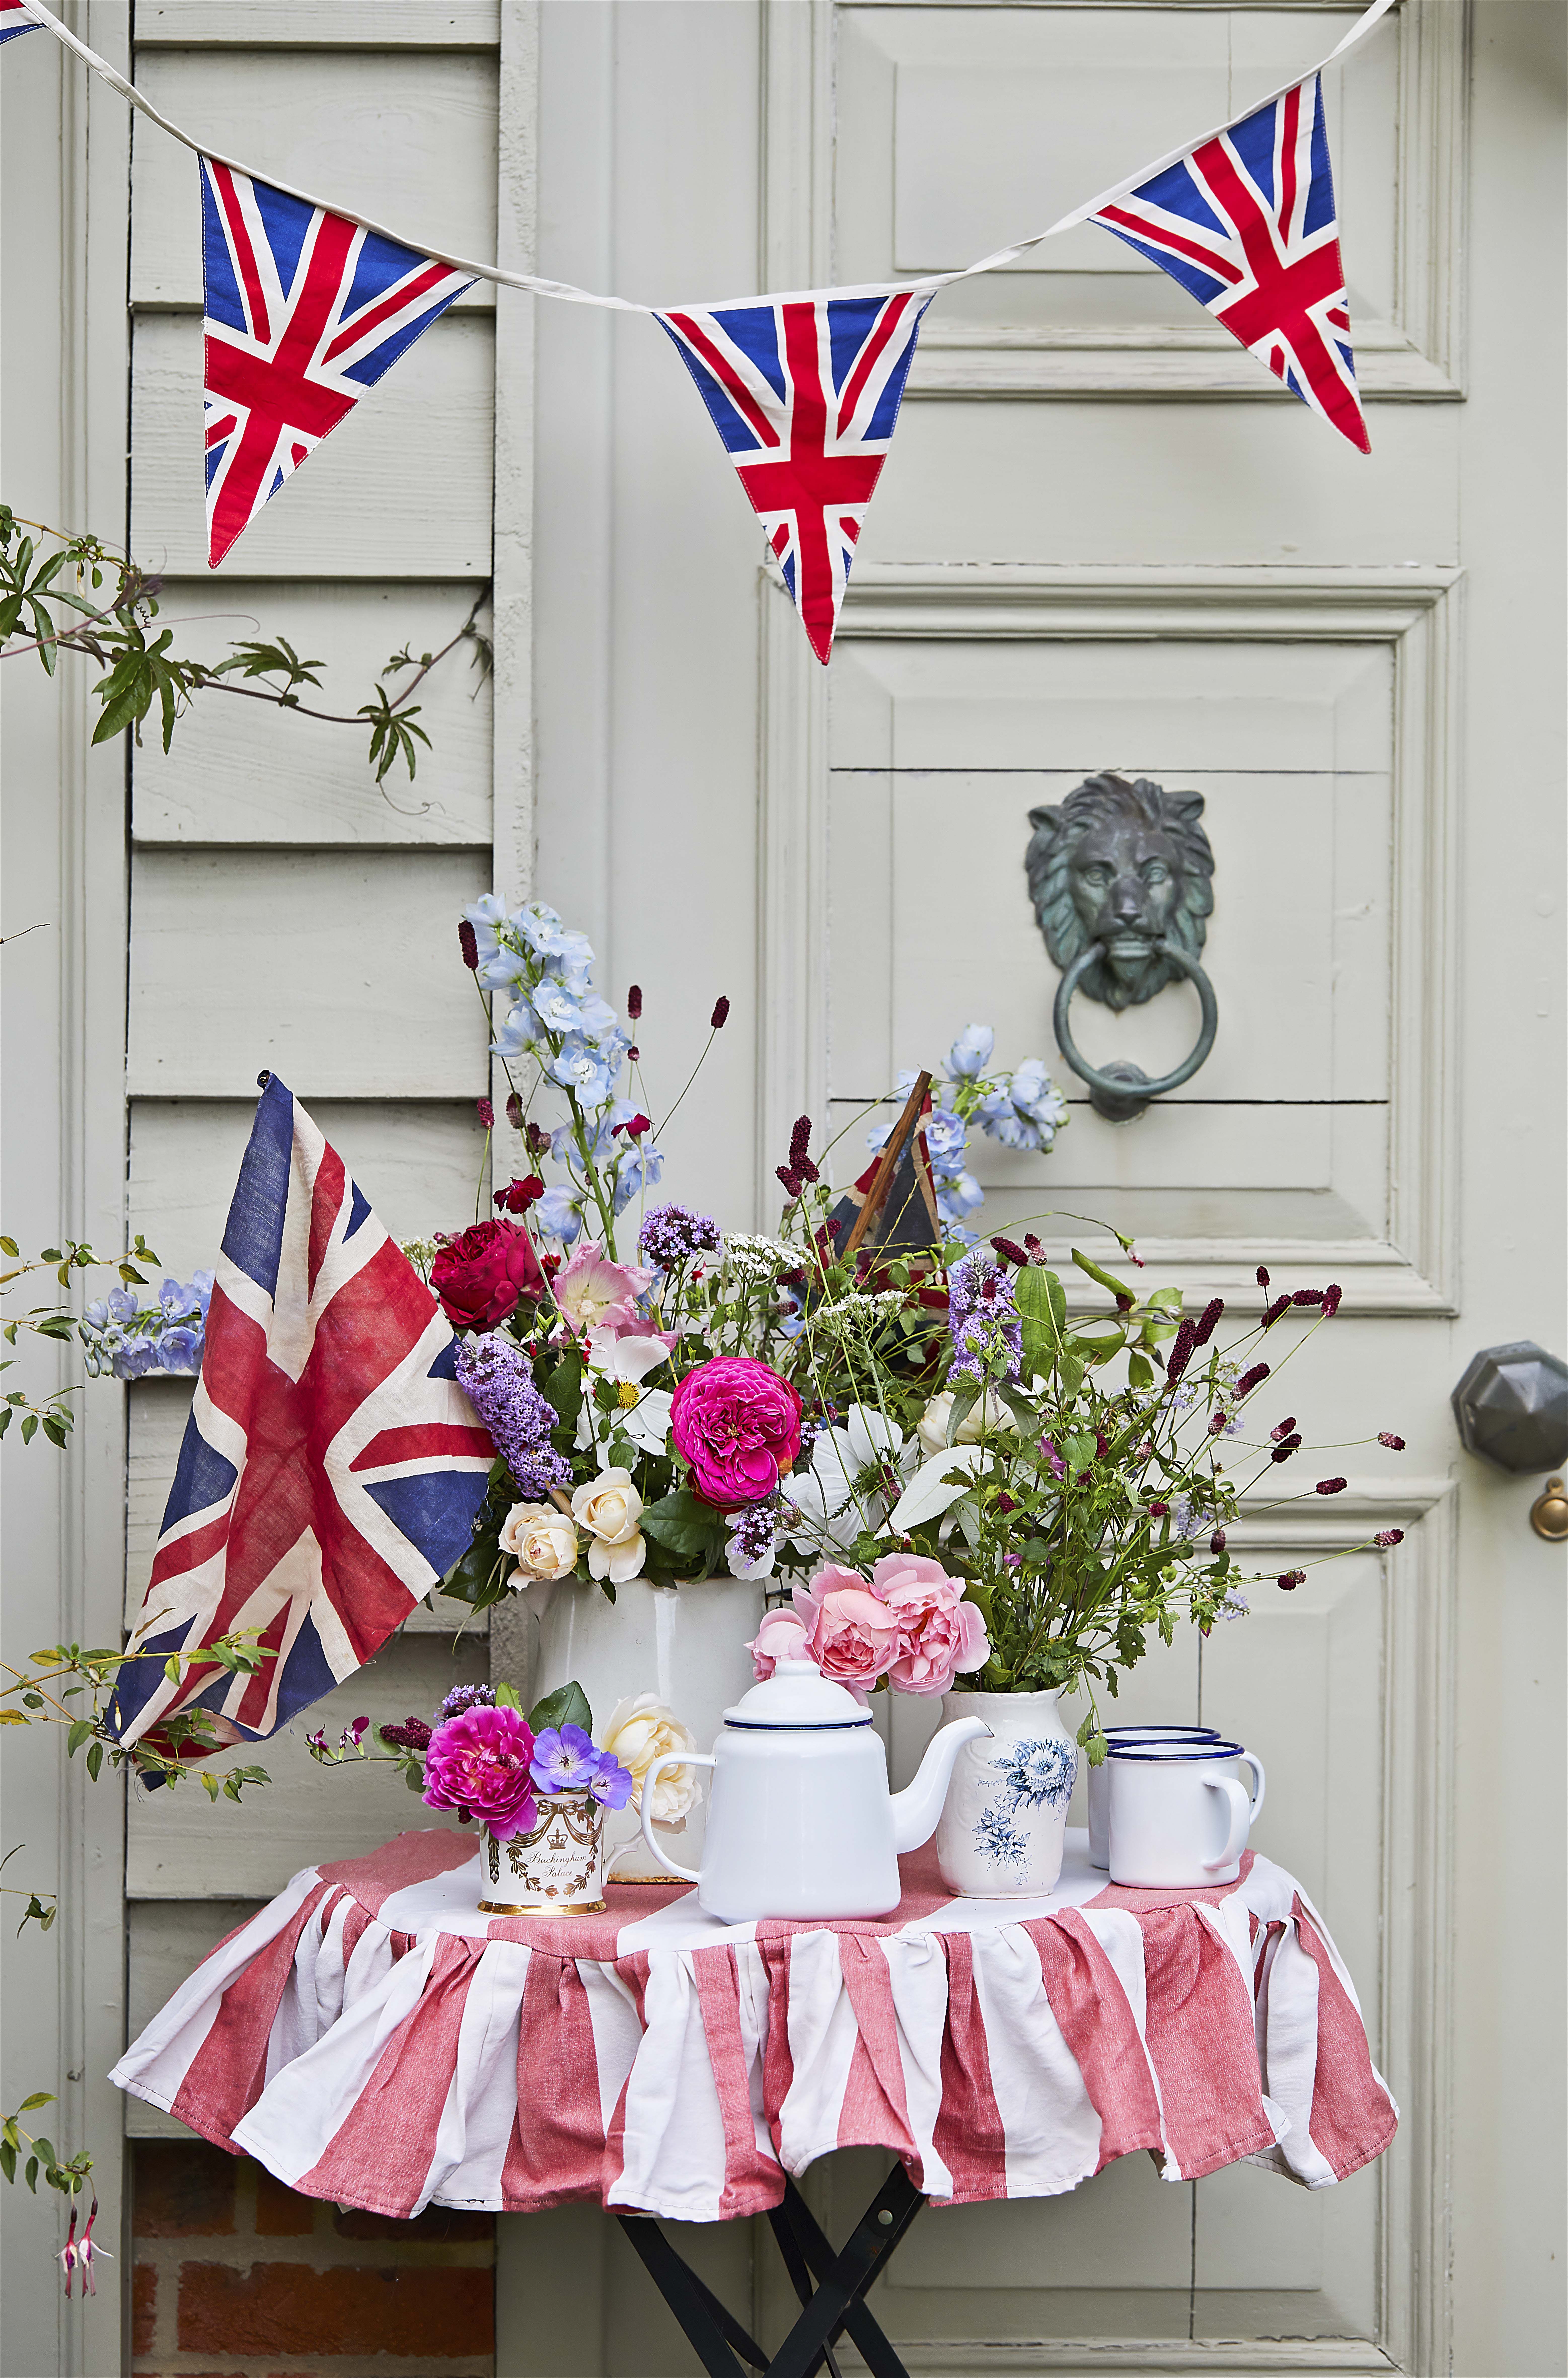 How to decorate a Coronation garden party